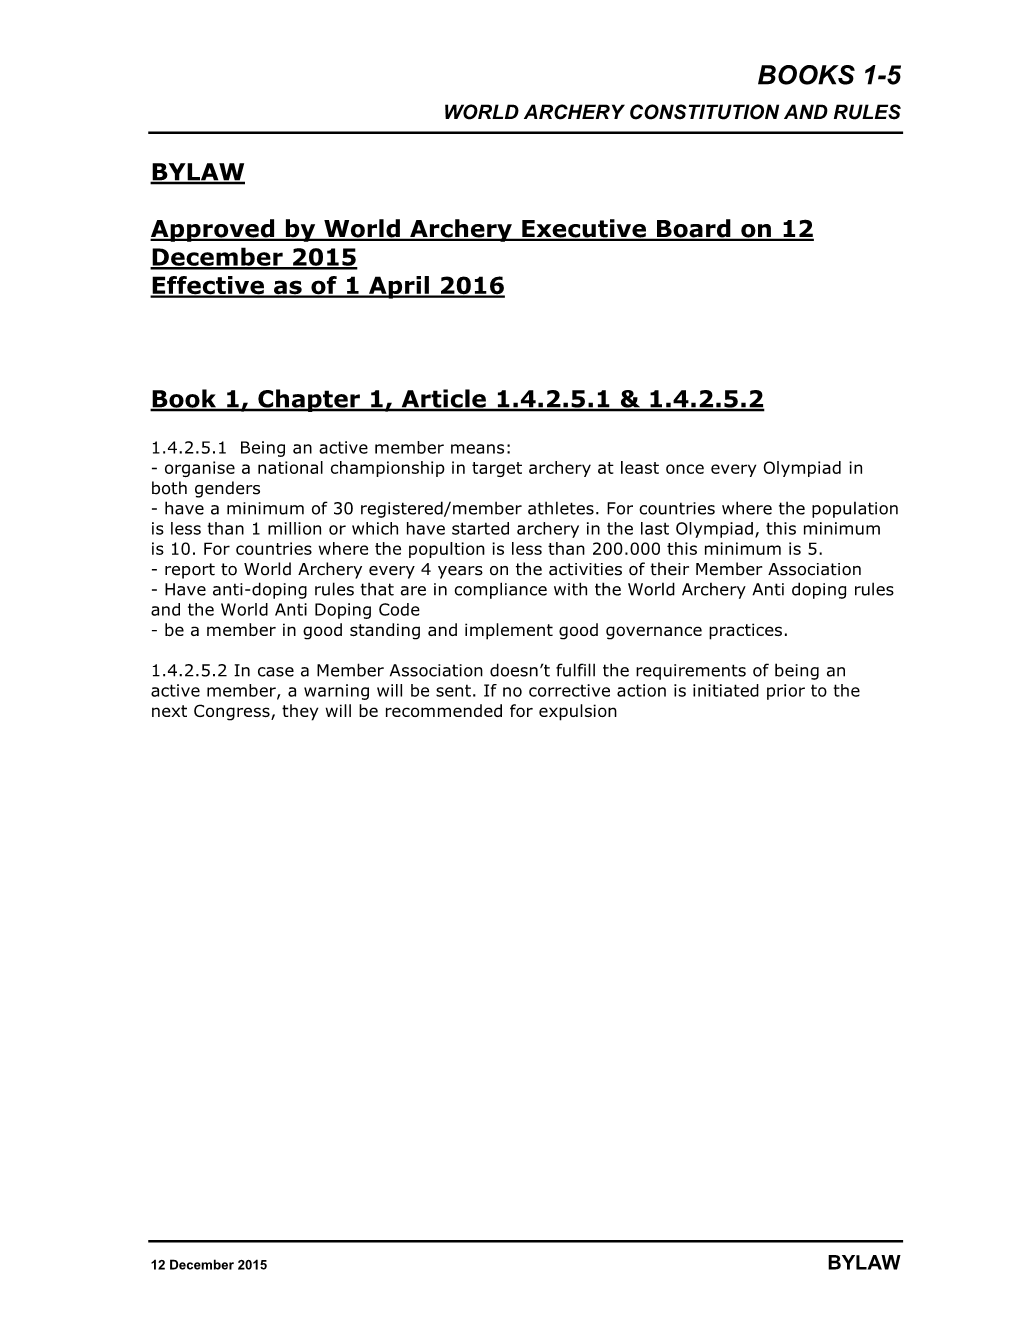 Books 1-5 World Archery Constitution and Rules